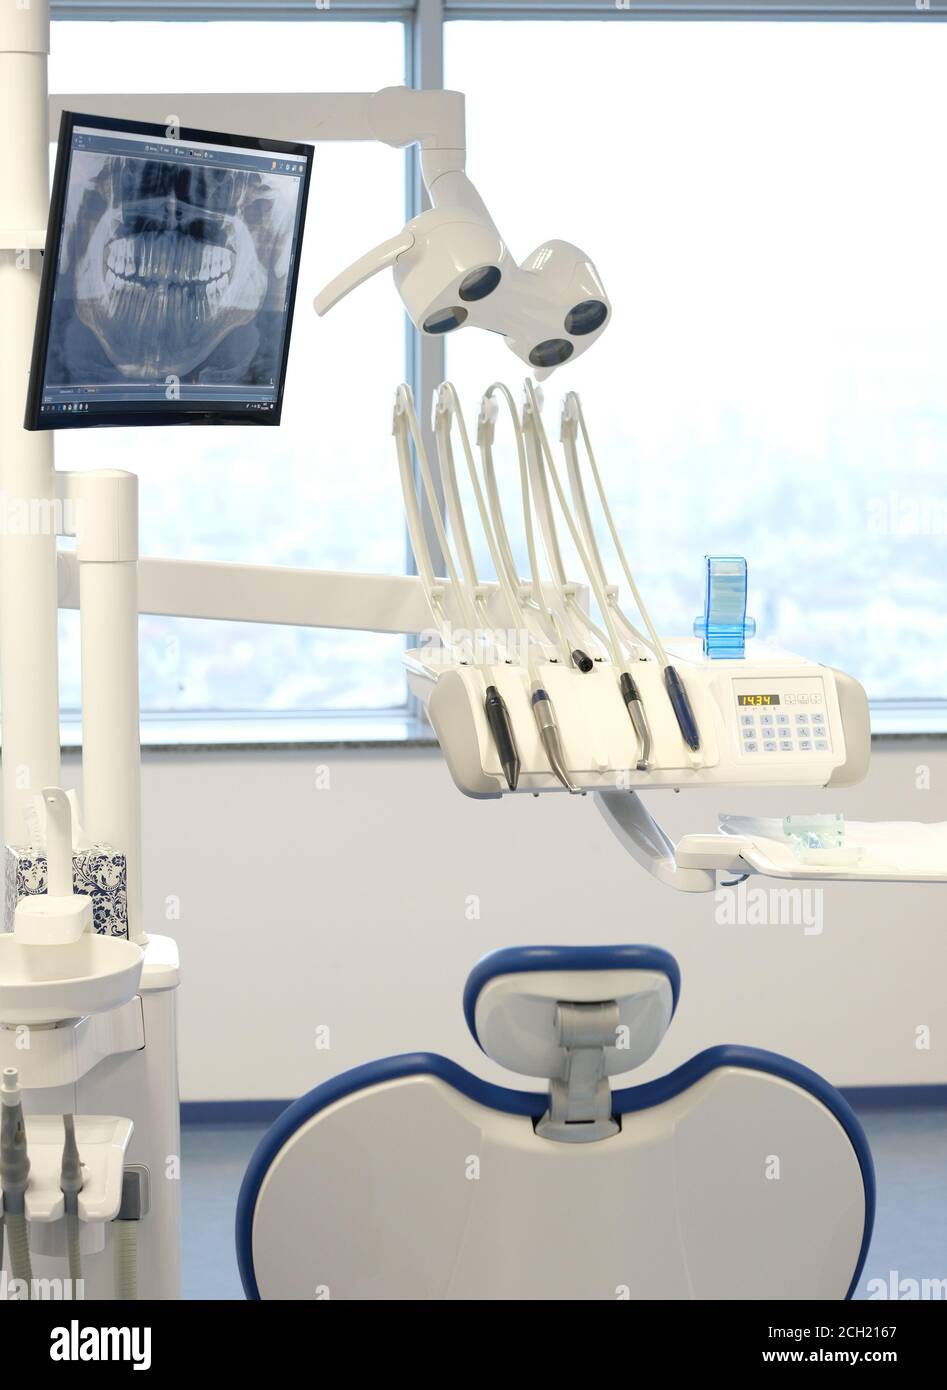 Modern dental practice. Dental chair and other accessories used by dentists. Stock Photo